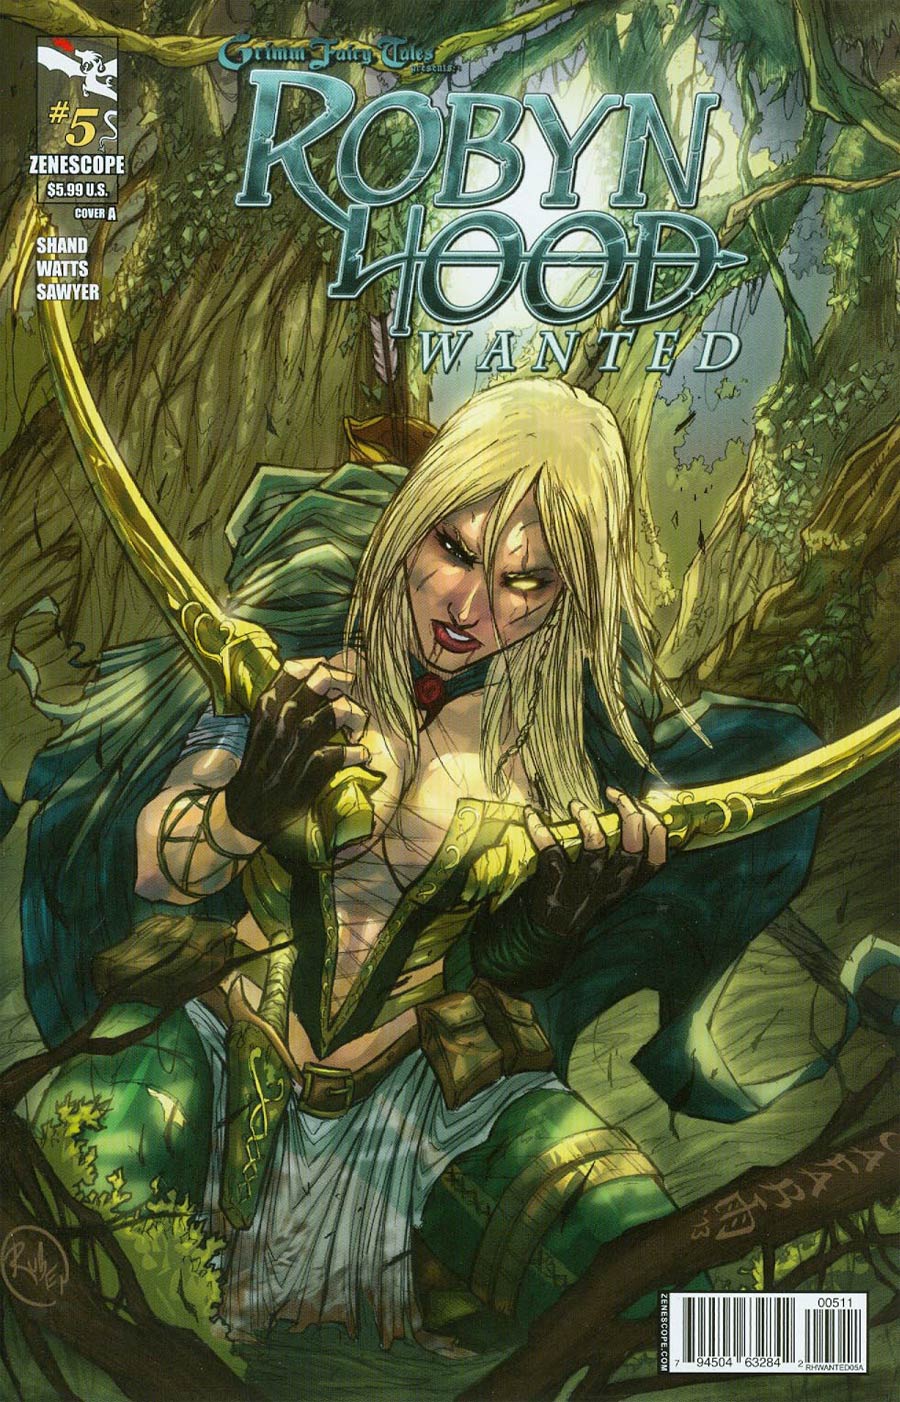 Grimm Fairy Tales Presents Robyn Hood Wanted #5 Cover A Giuseppe Cafaro